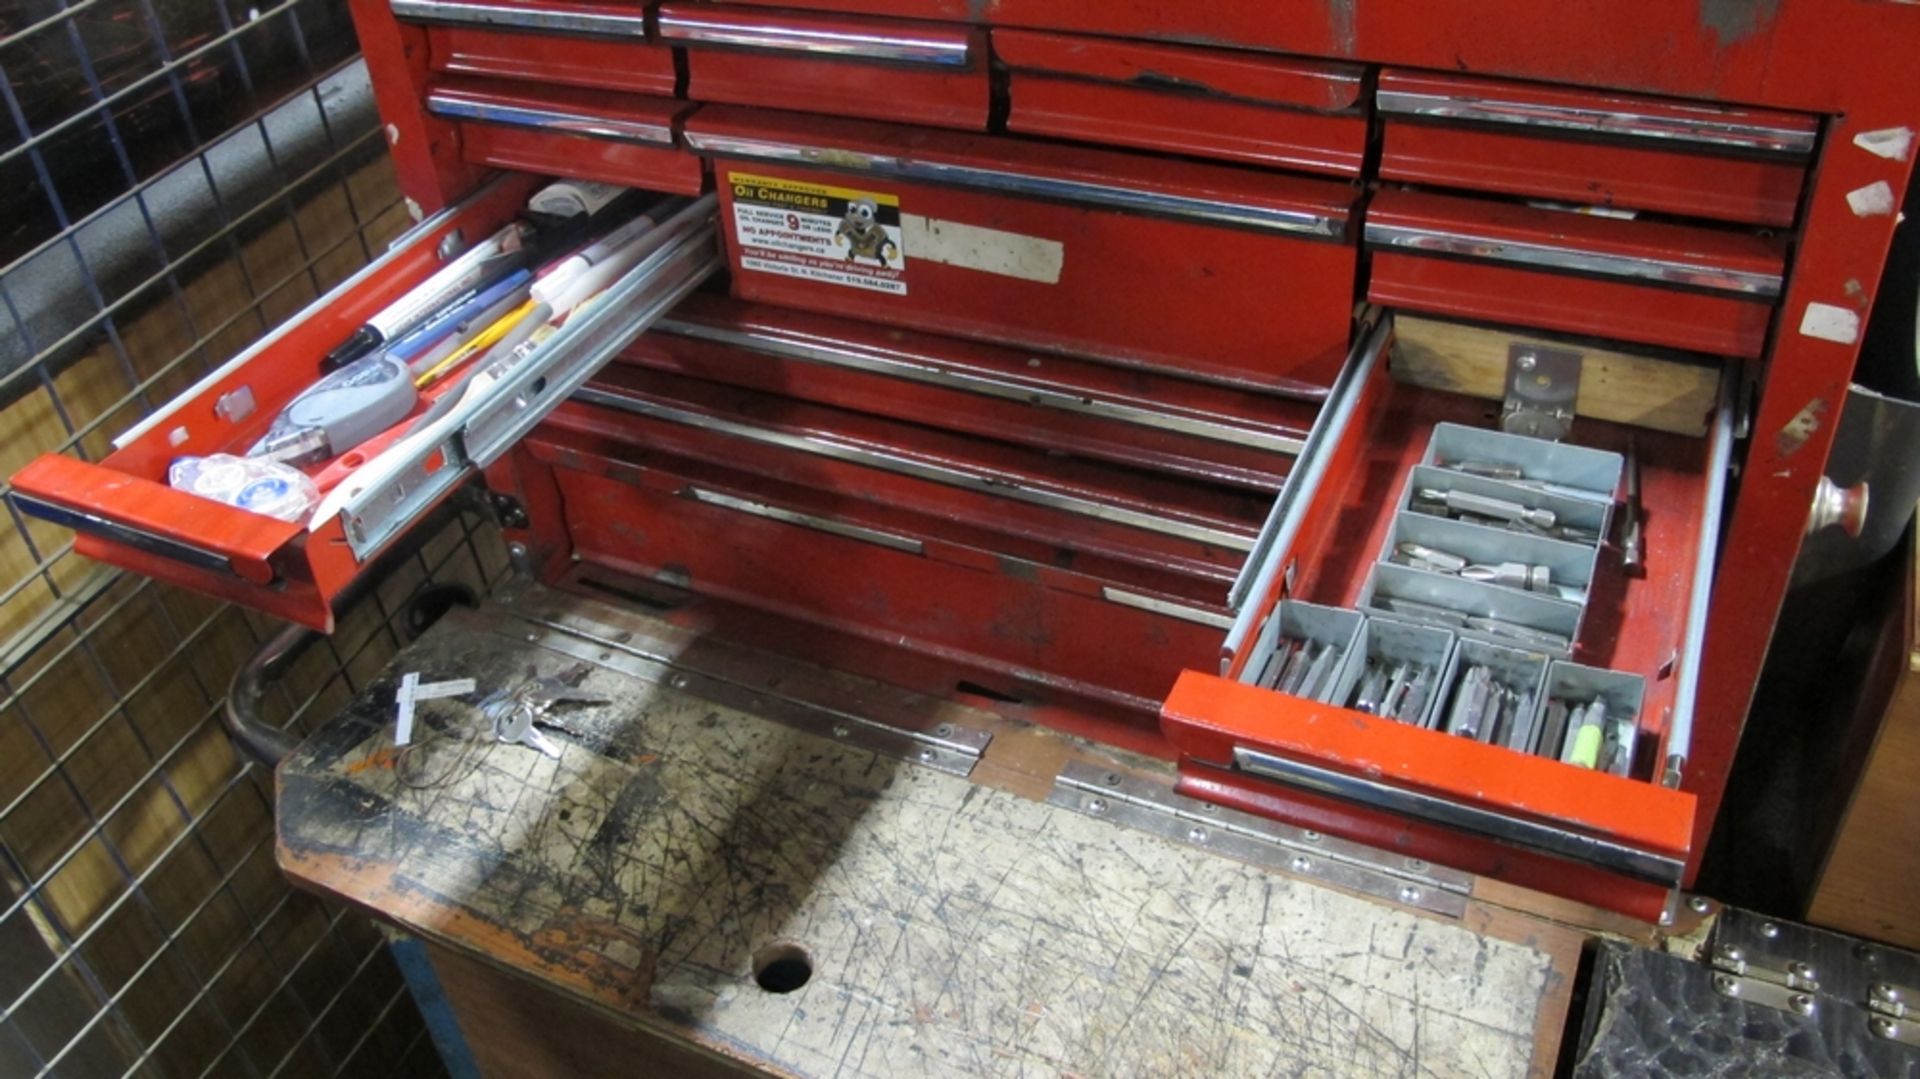 LOT OF 1 BEACH TOOL BOX, 12 DRAWERS W/SHOP CART AND TOOLS (100 SHIRLEY AVE KITCHENER) - Image 5 of 8